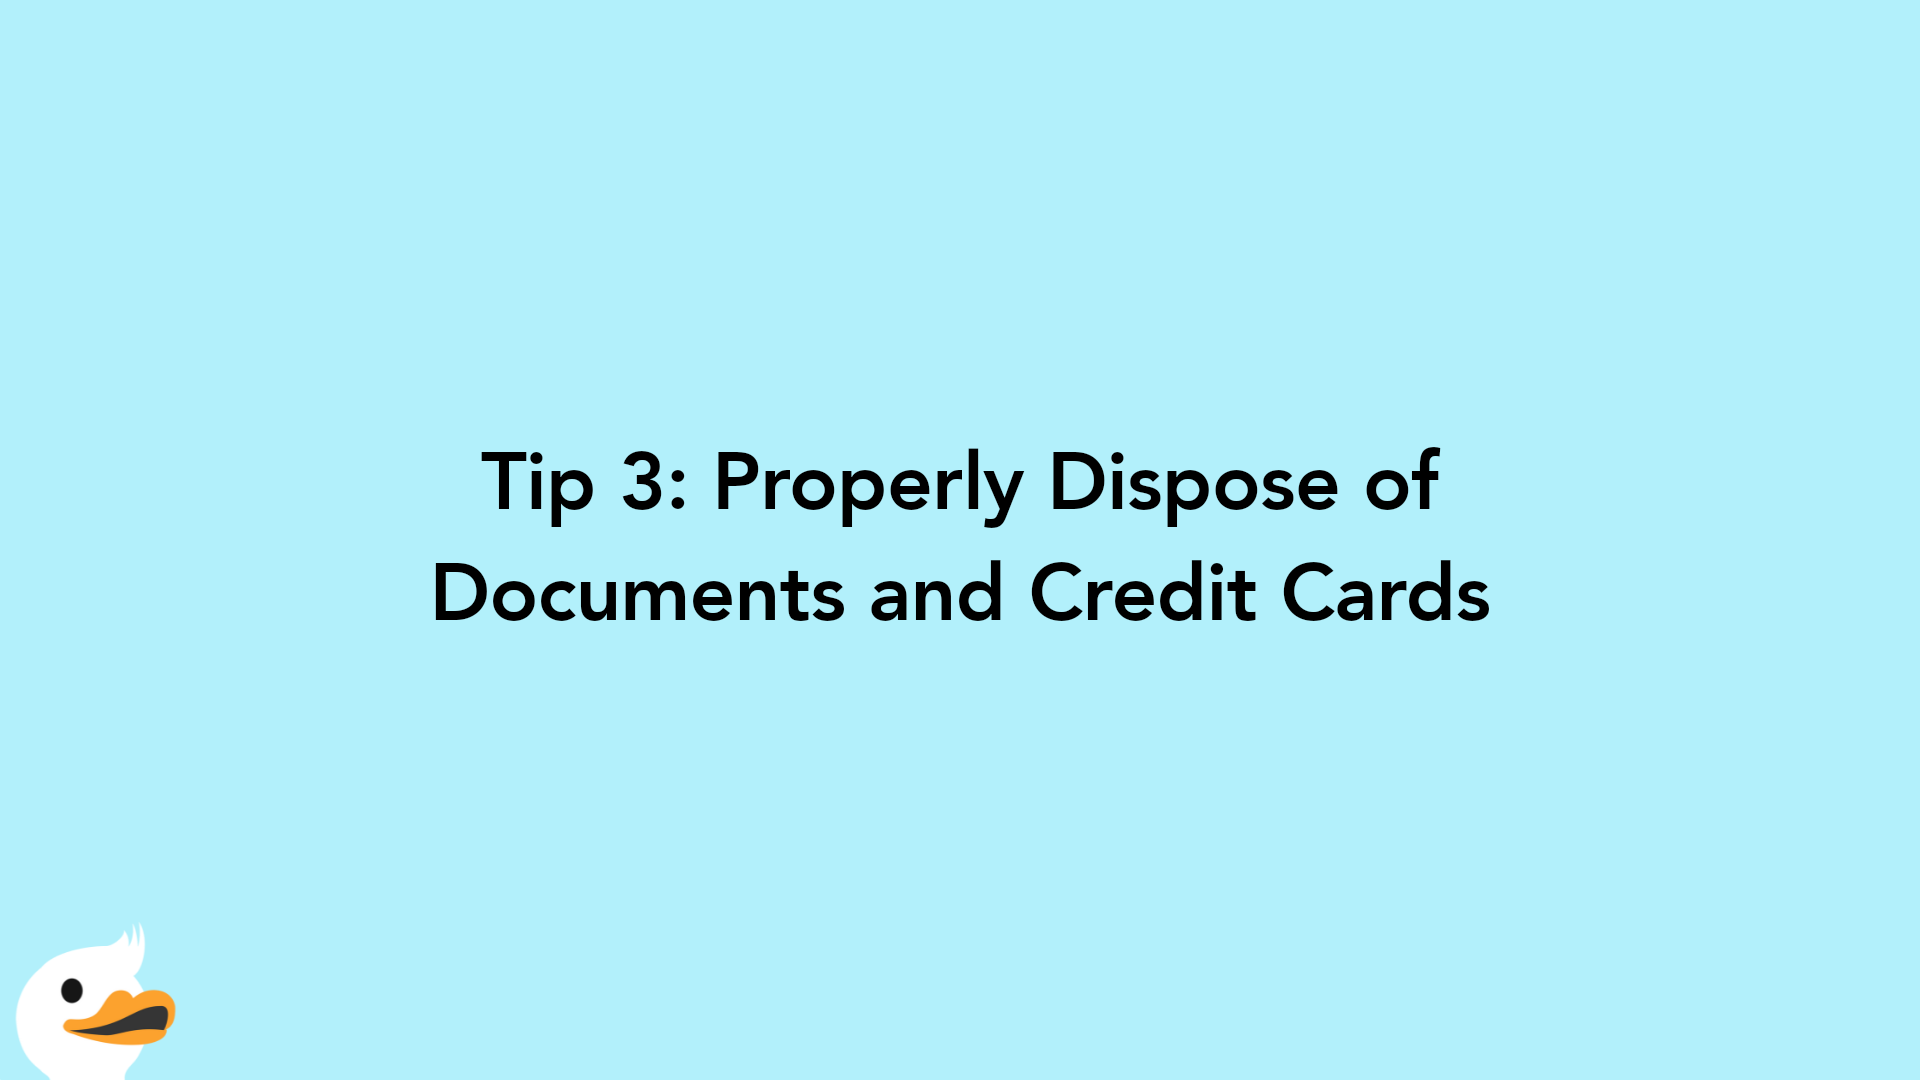 Tip 3: Properly Dispose of Documents and Credit Cards